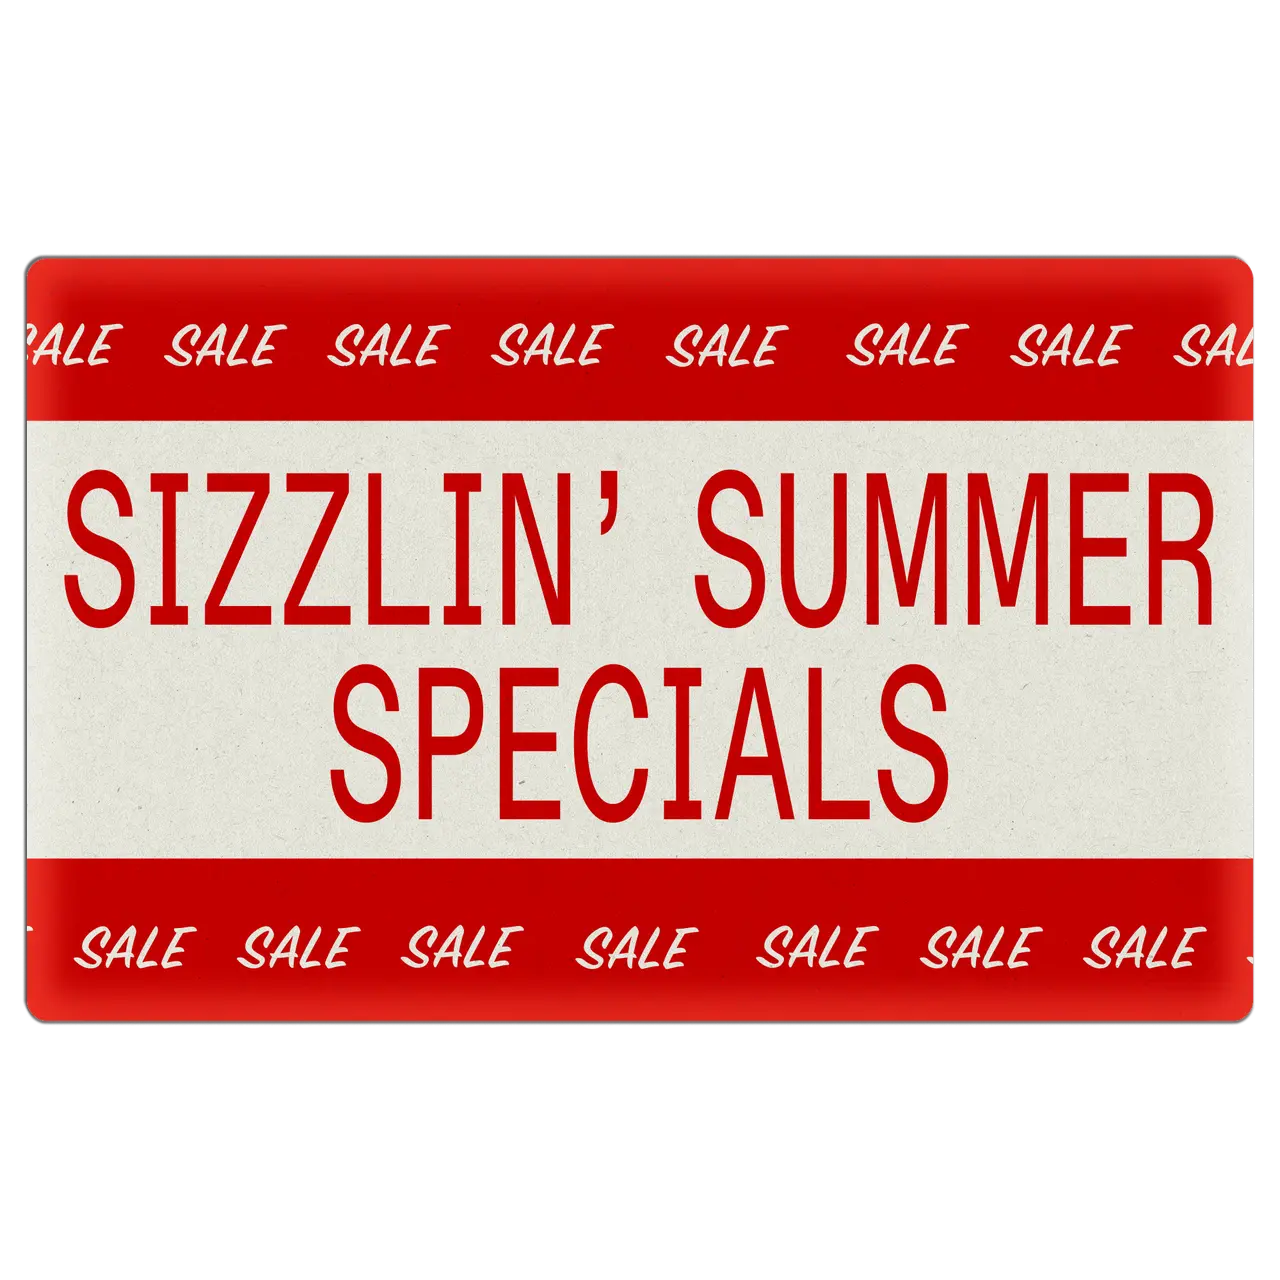 A red and white promotional banner announces "SIZZLIN' SUMMER SPECIALS" with "SALE" repeated across the top and bottom.